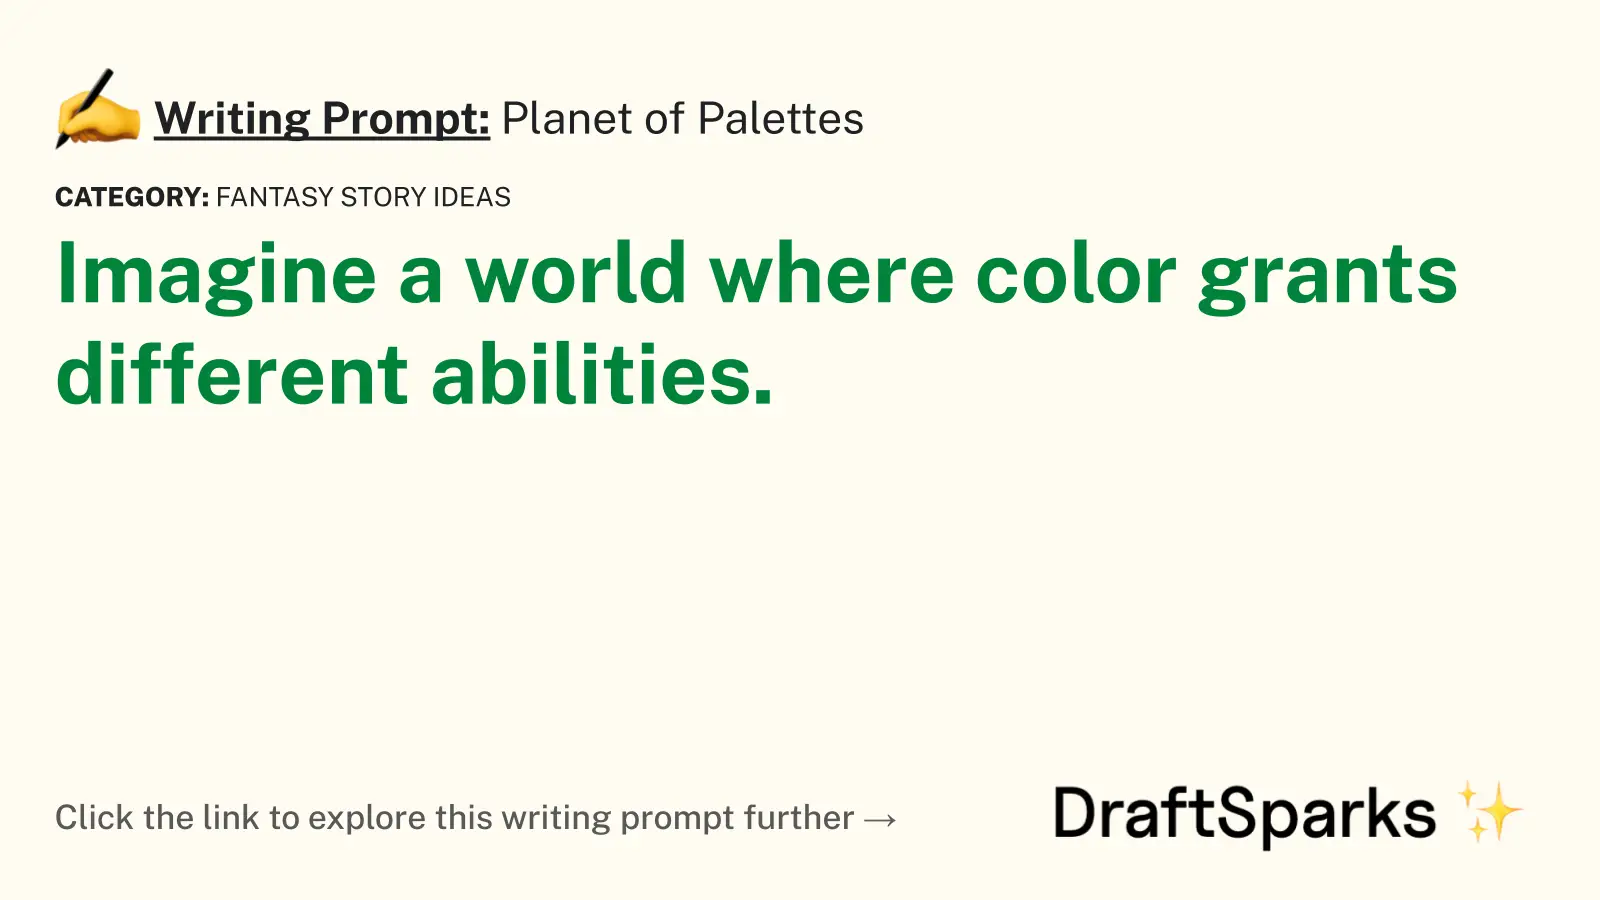 Planet of Palettes